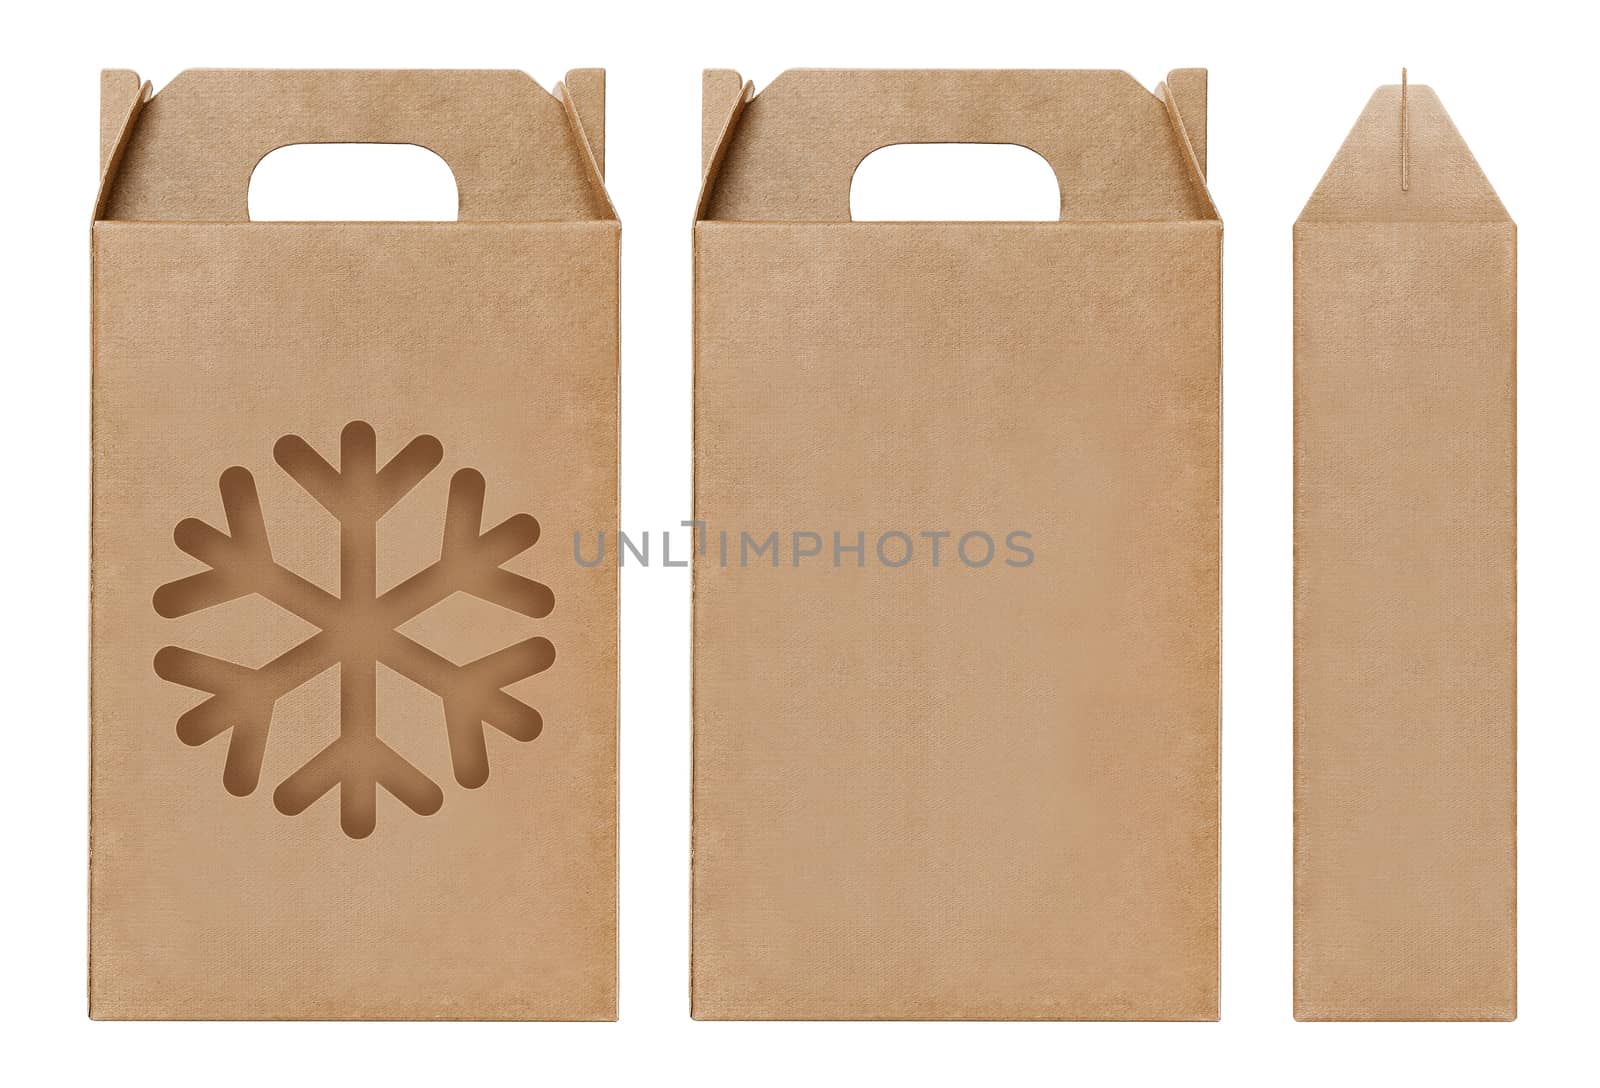 Box brown window Ice snow shape cut out Packaging template, Empty kraft Box Cardboard isolated white background, Boxes Paper kraft natural material, Gift Box Brown Paper from Industrial Packaging carton by cgdeaw